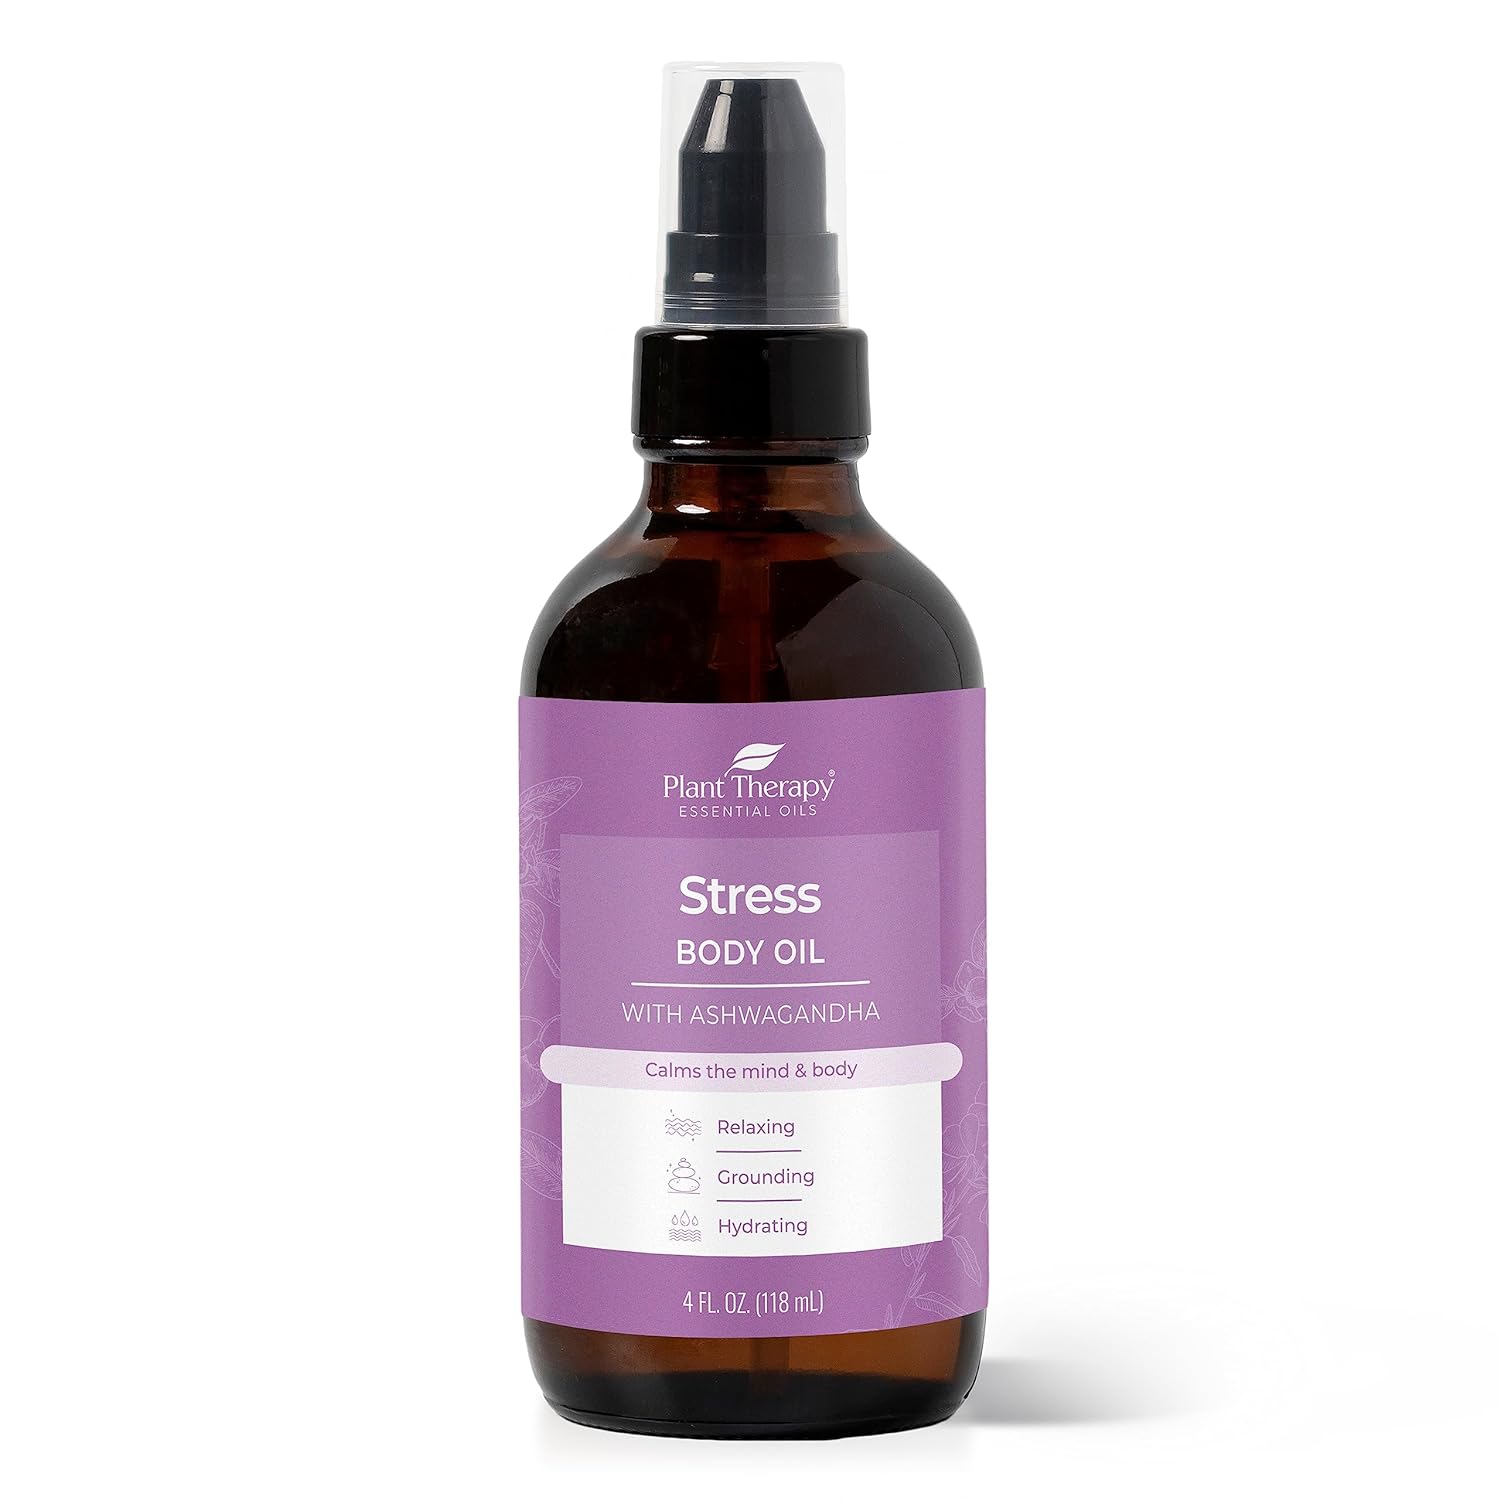 Plant Therapy Stress Body Oil with Ashwagandha 4 oz Calms & Eases Tension, Softens & Nourishes Skin, Great for a Relaxing Massage